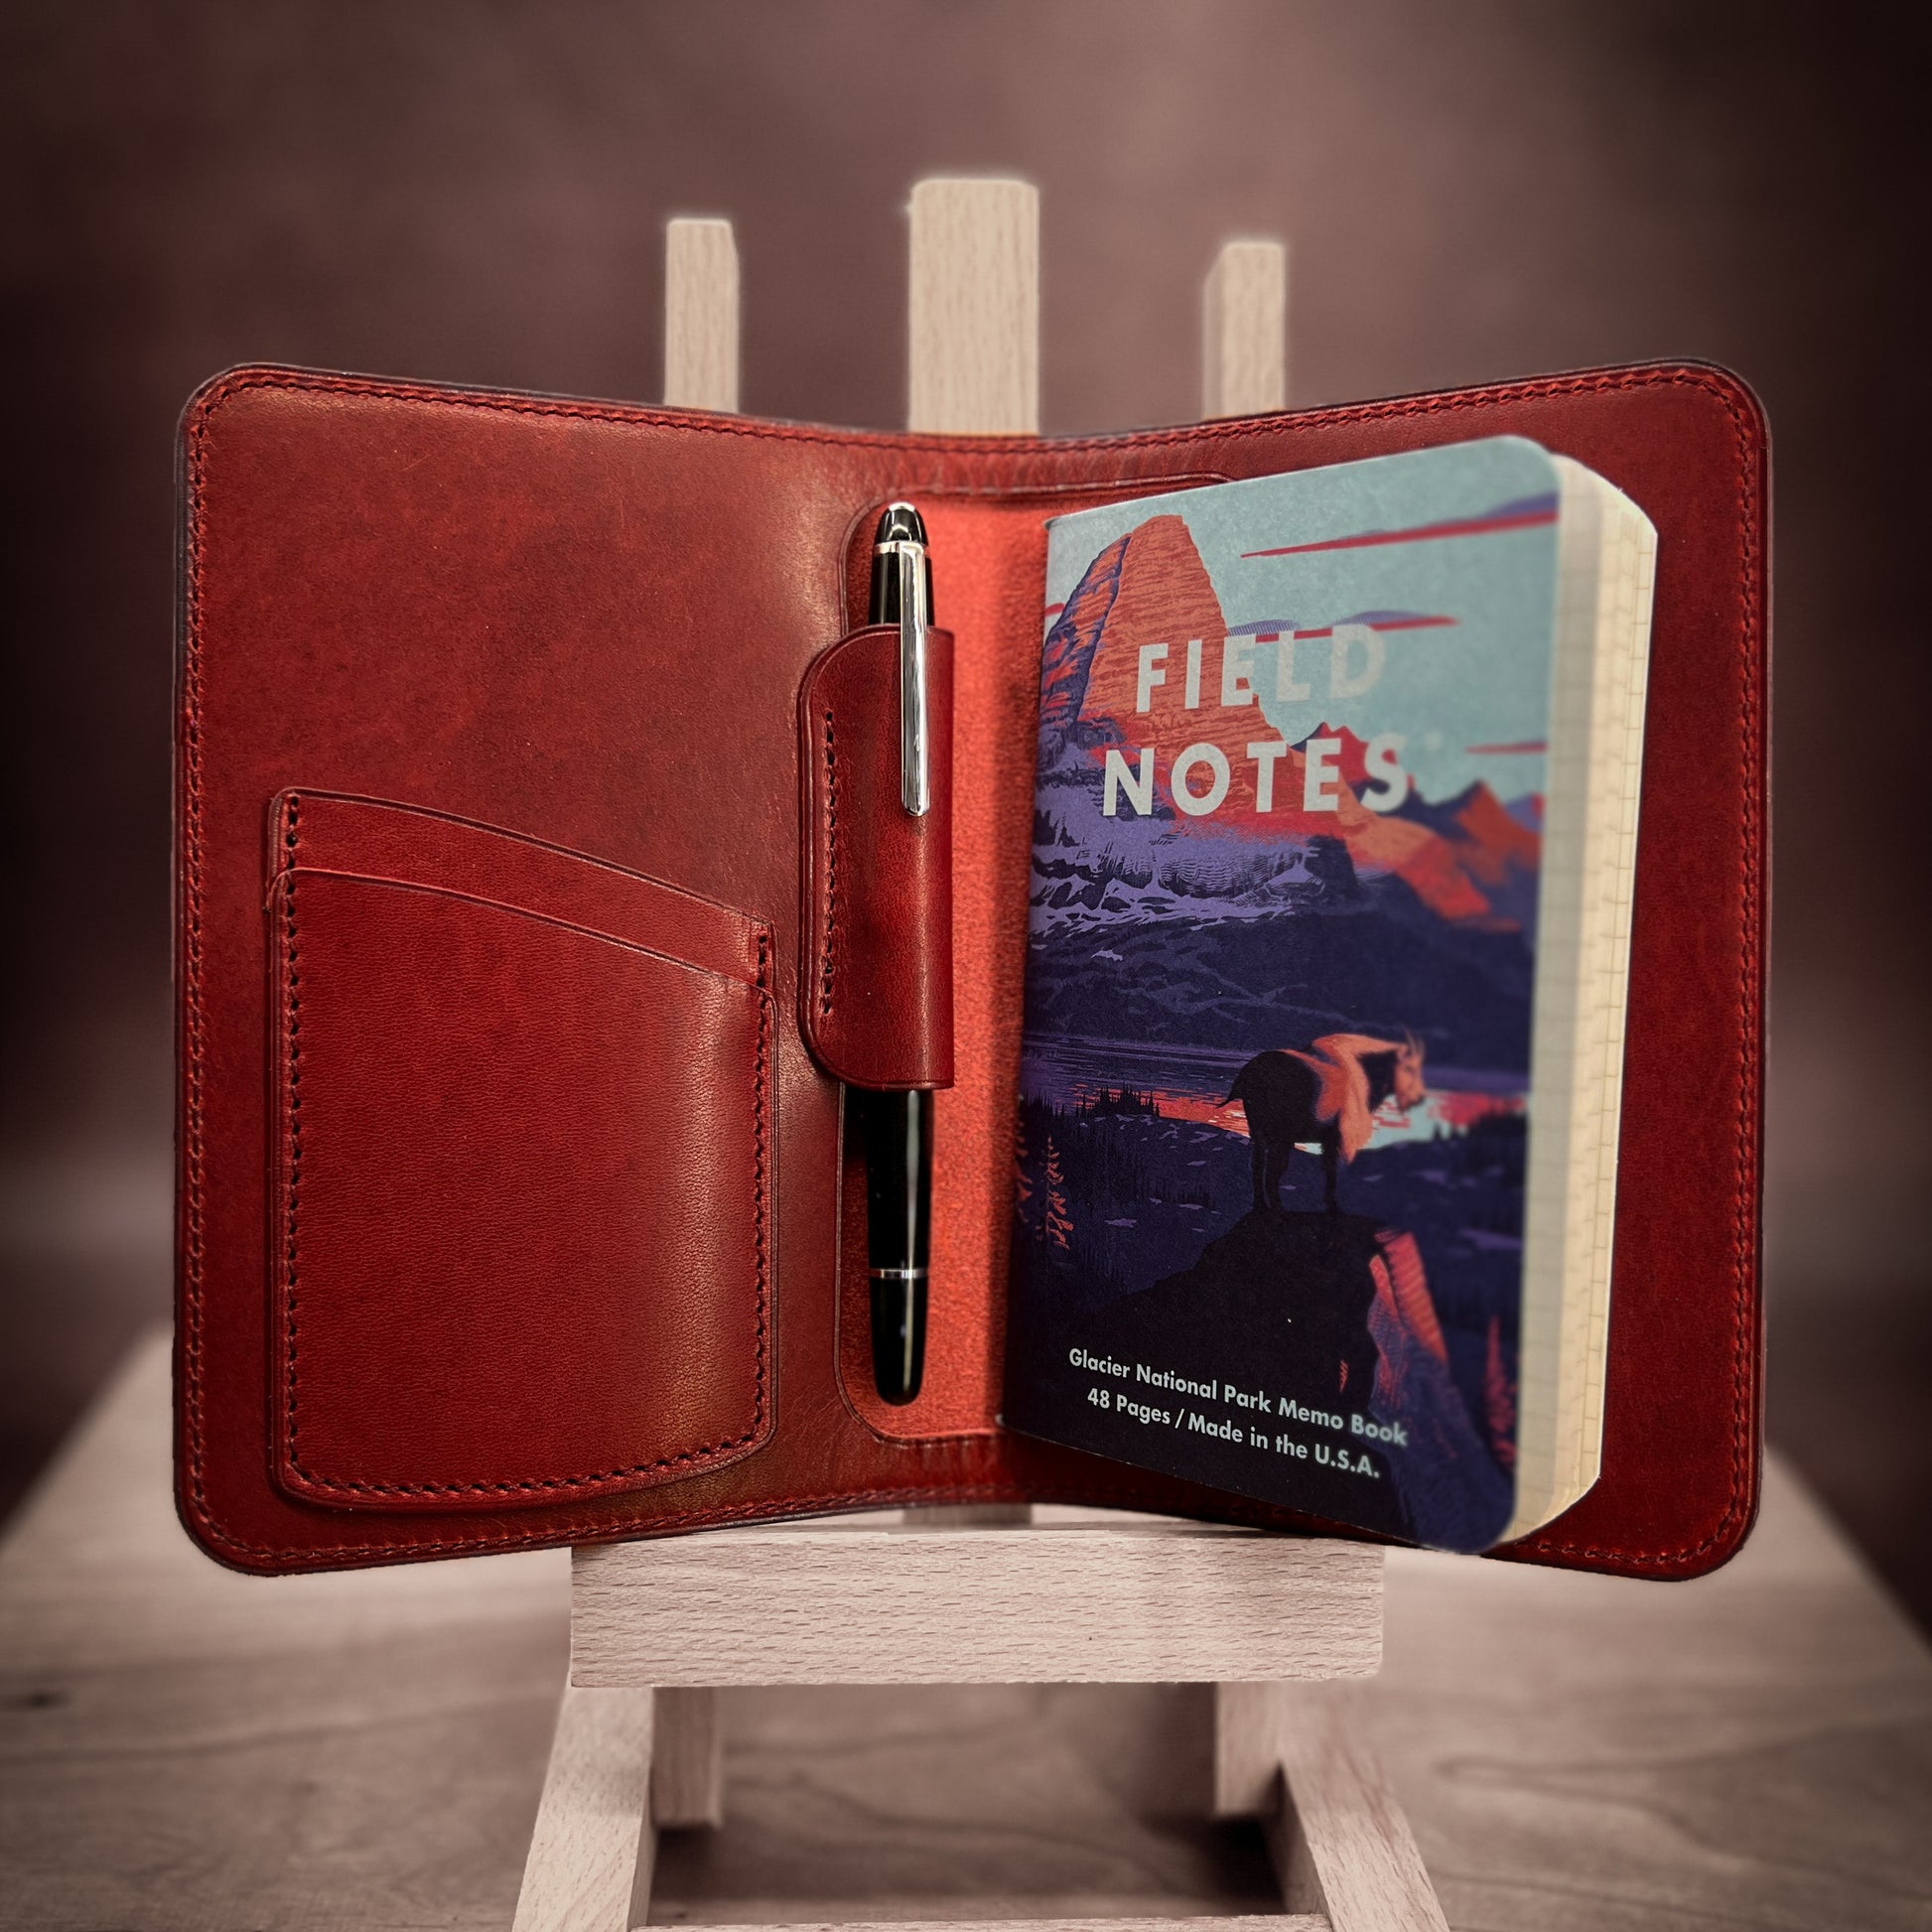 Custom Red Horween Leather Pocket Notebook Cover with 2 interior pockets.